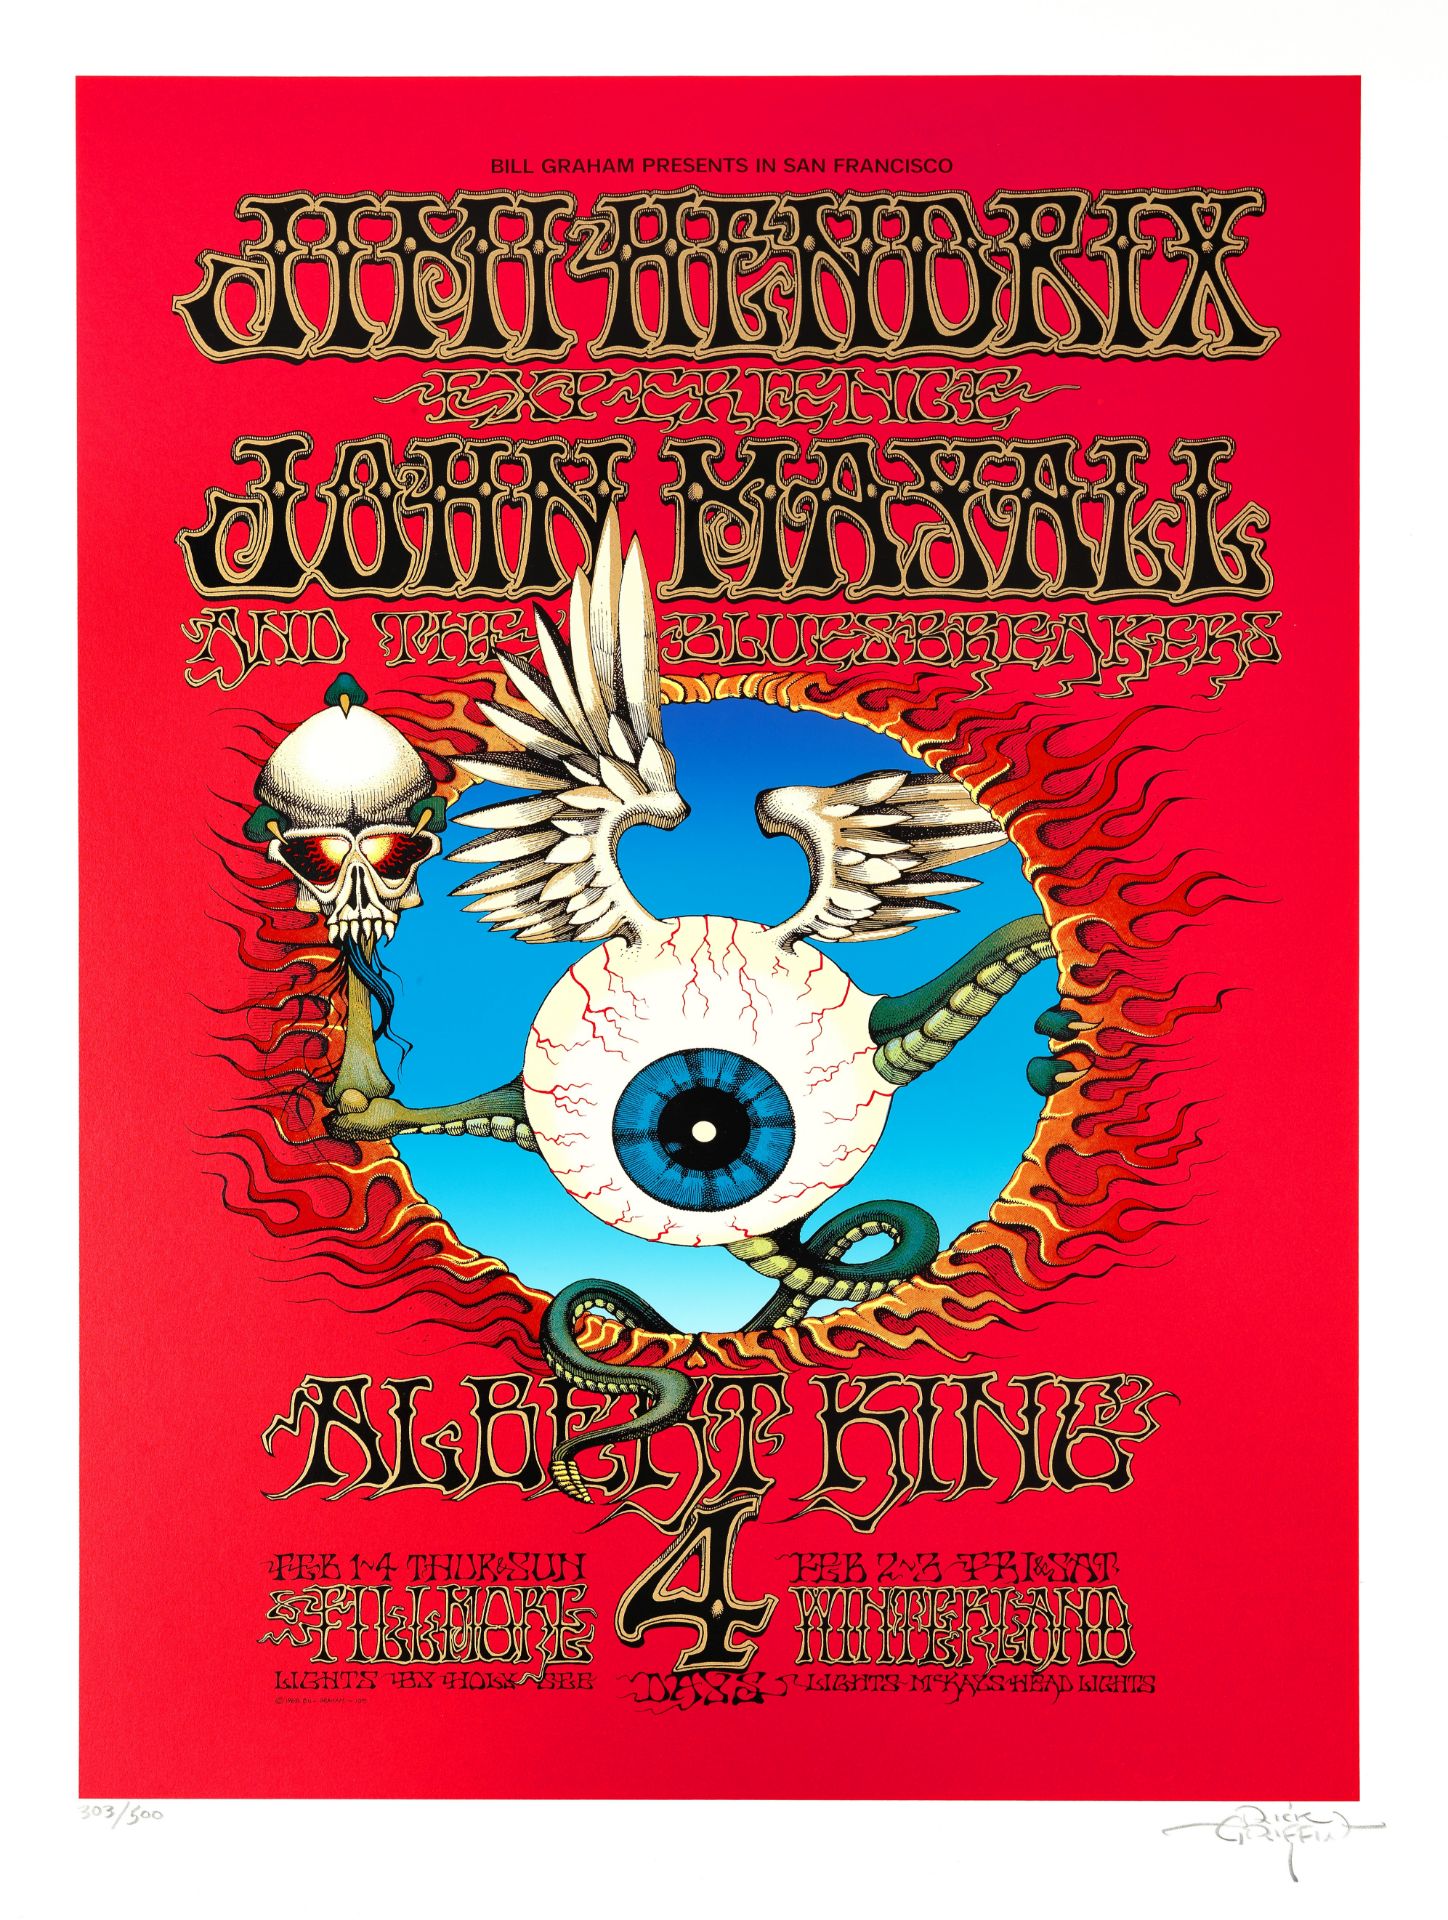 Jimi Hendrix: A limited edition 'Flying Eyeball' print signed by Rick Griffin, circa 1989,